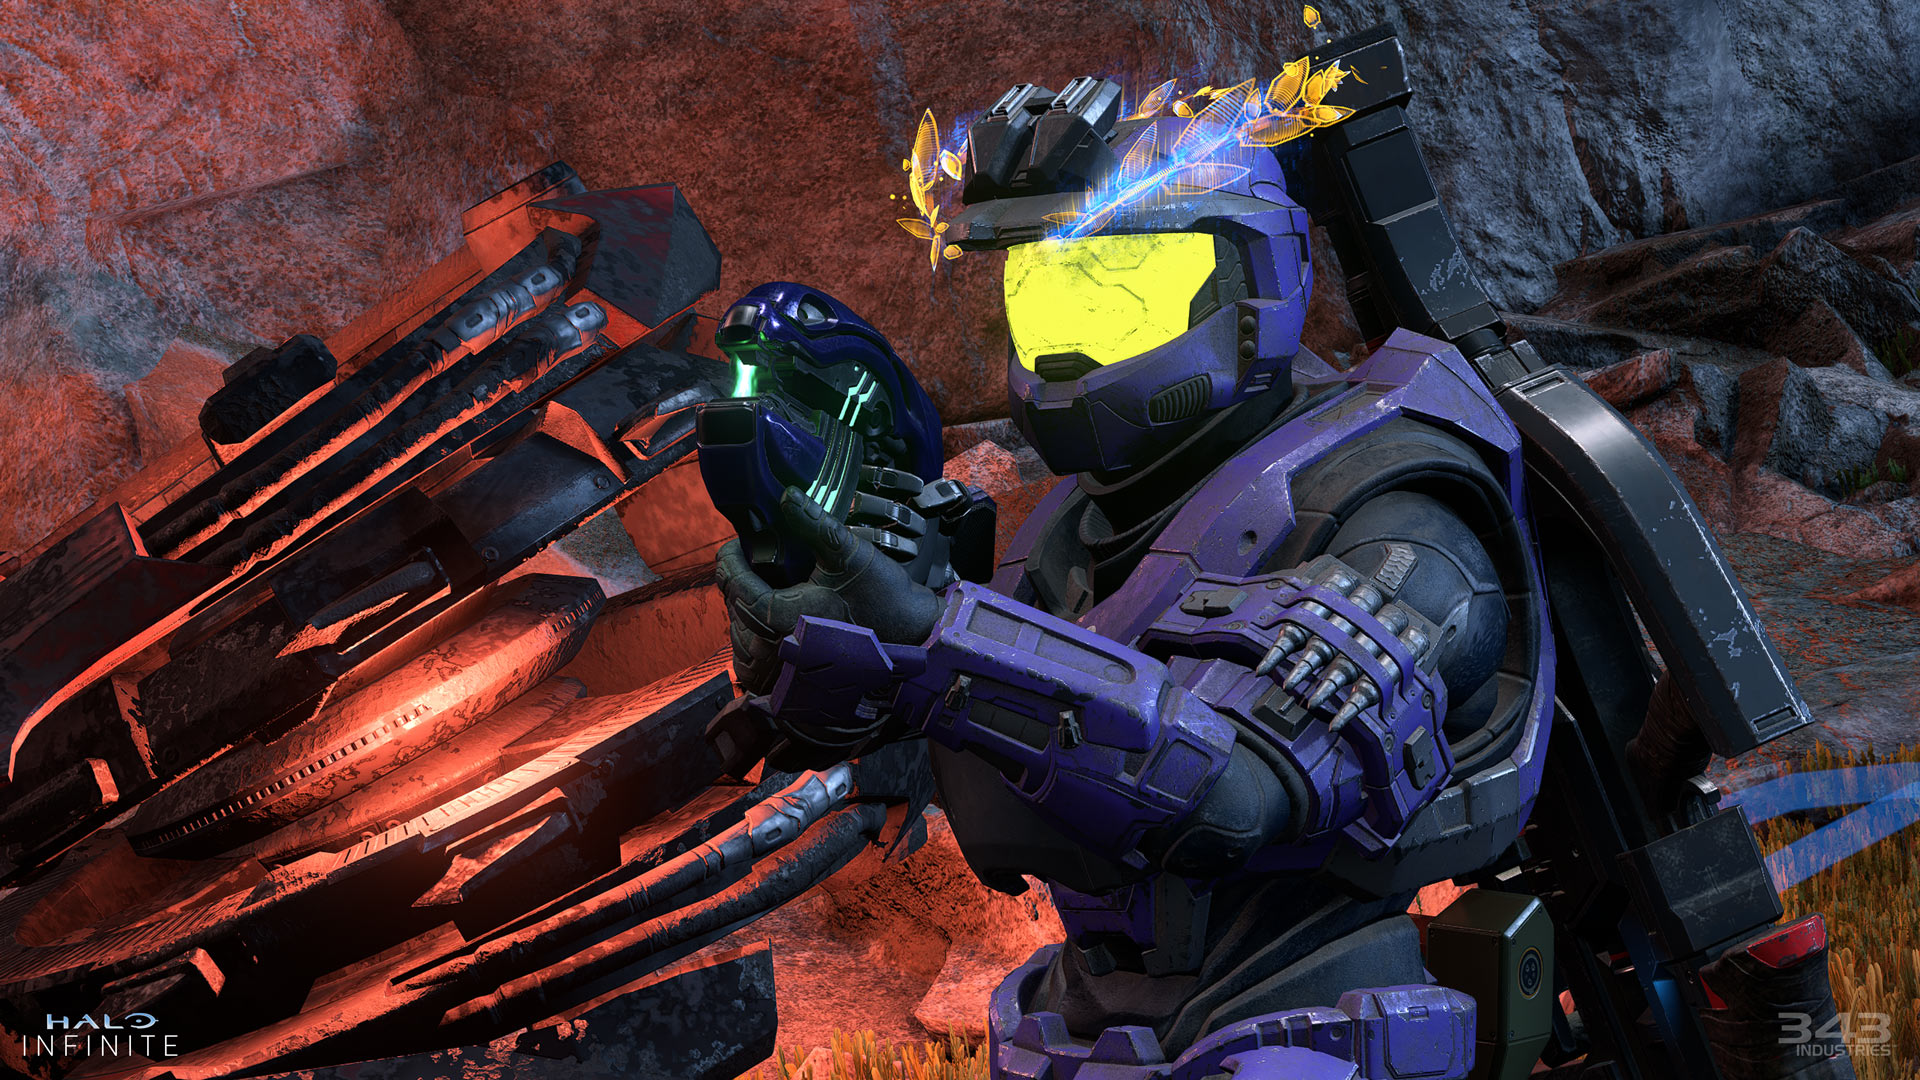 A Spartan wearing purple Mark V [B] armor holds a Plasma Pistol with a destroyed Brute Chopper in flames behind them.